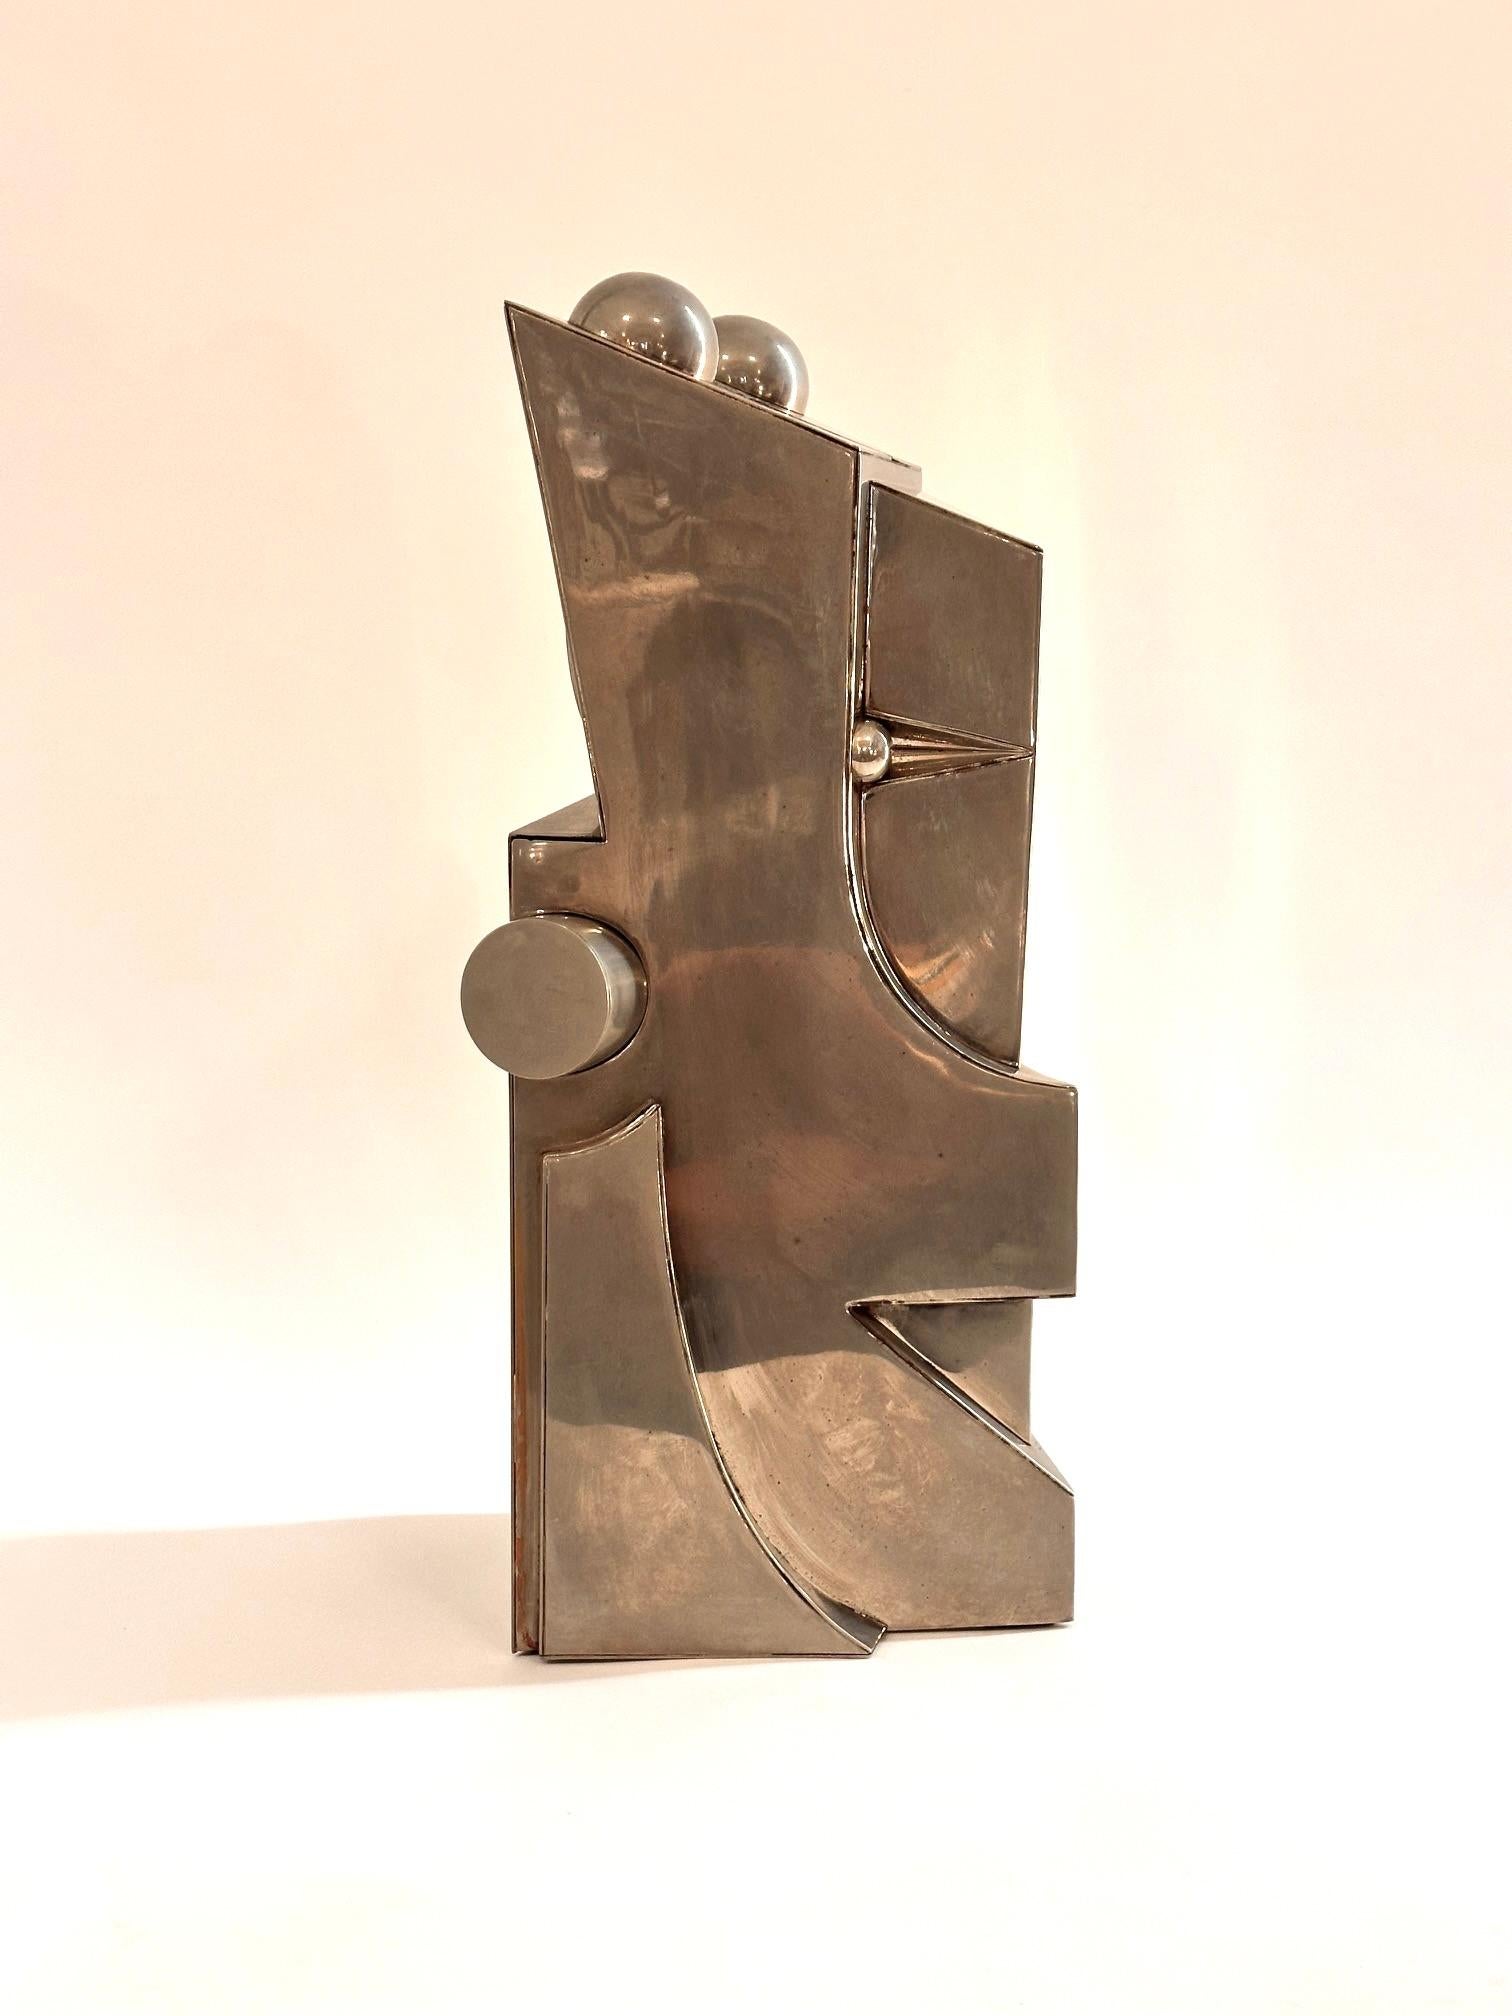 Modern Abstract Polished Steel Sculpture 